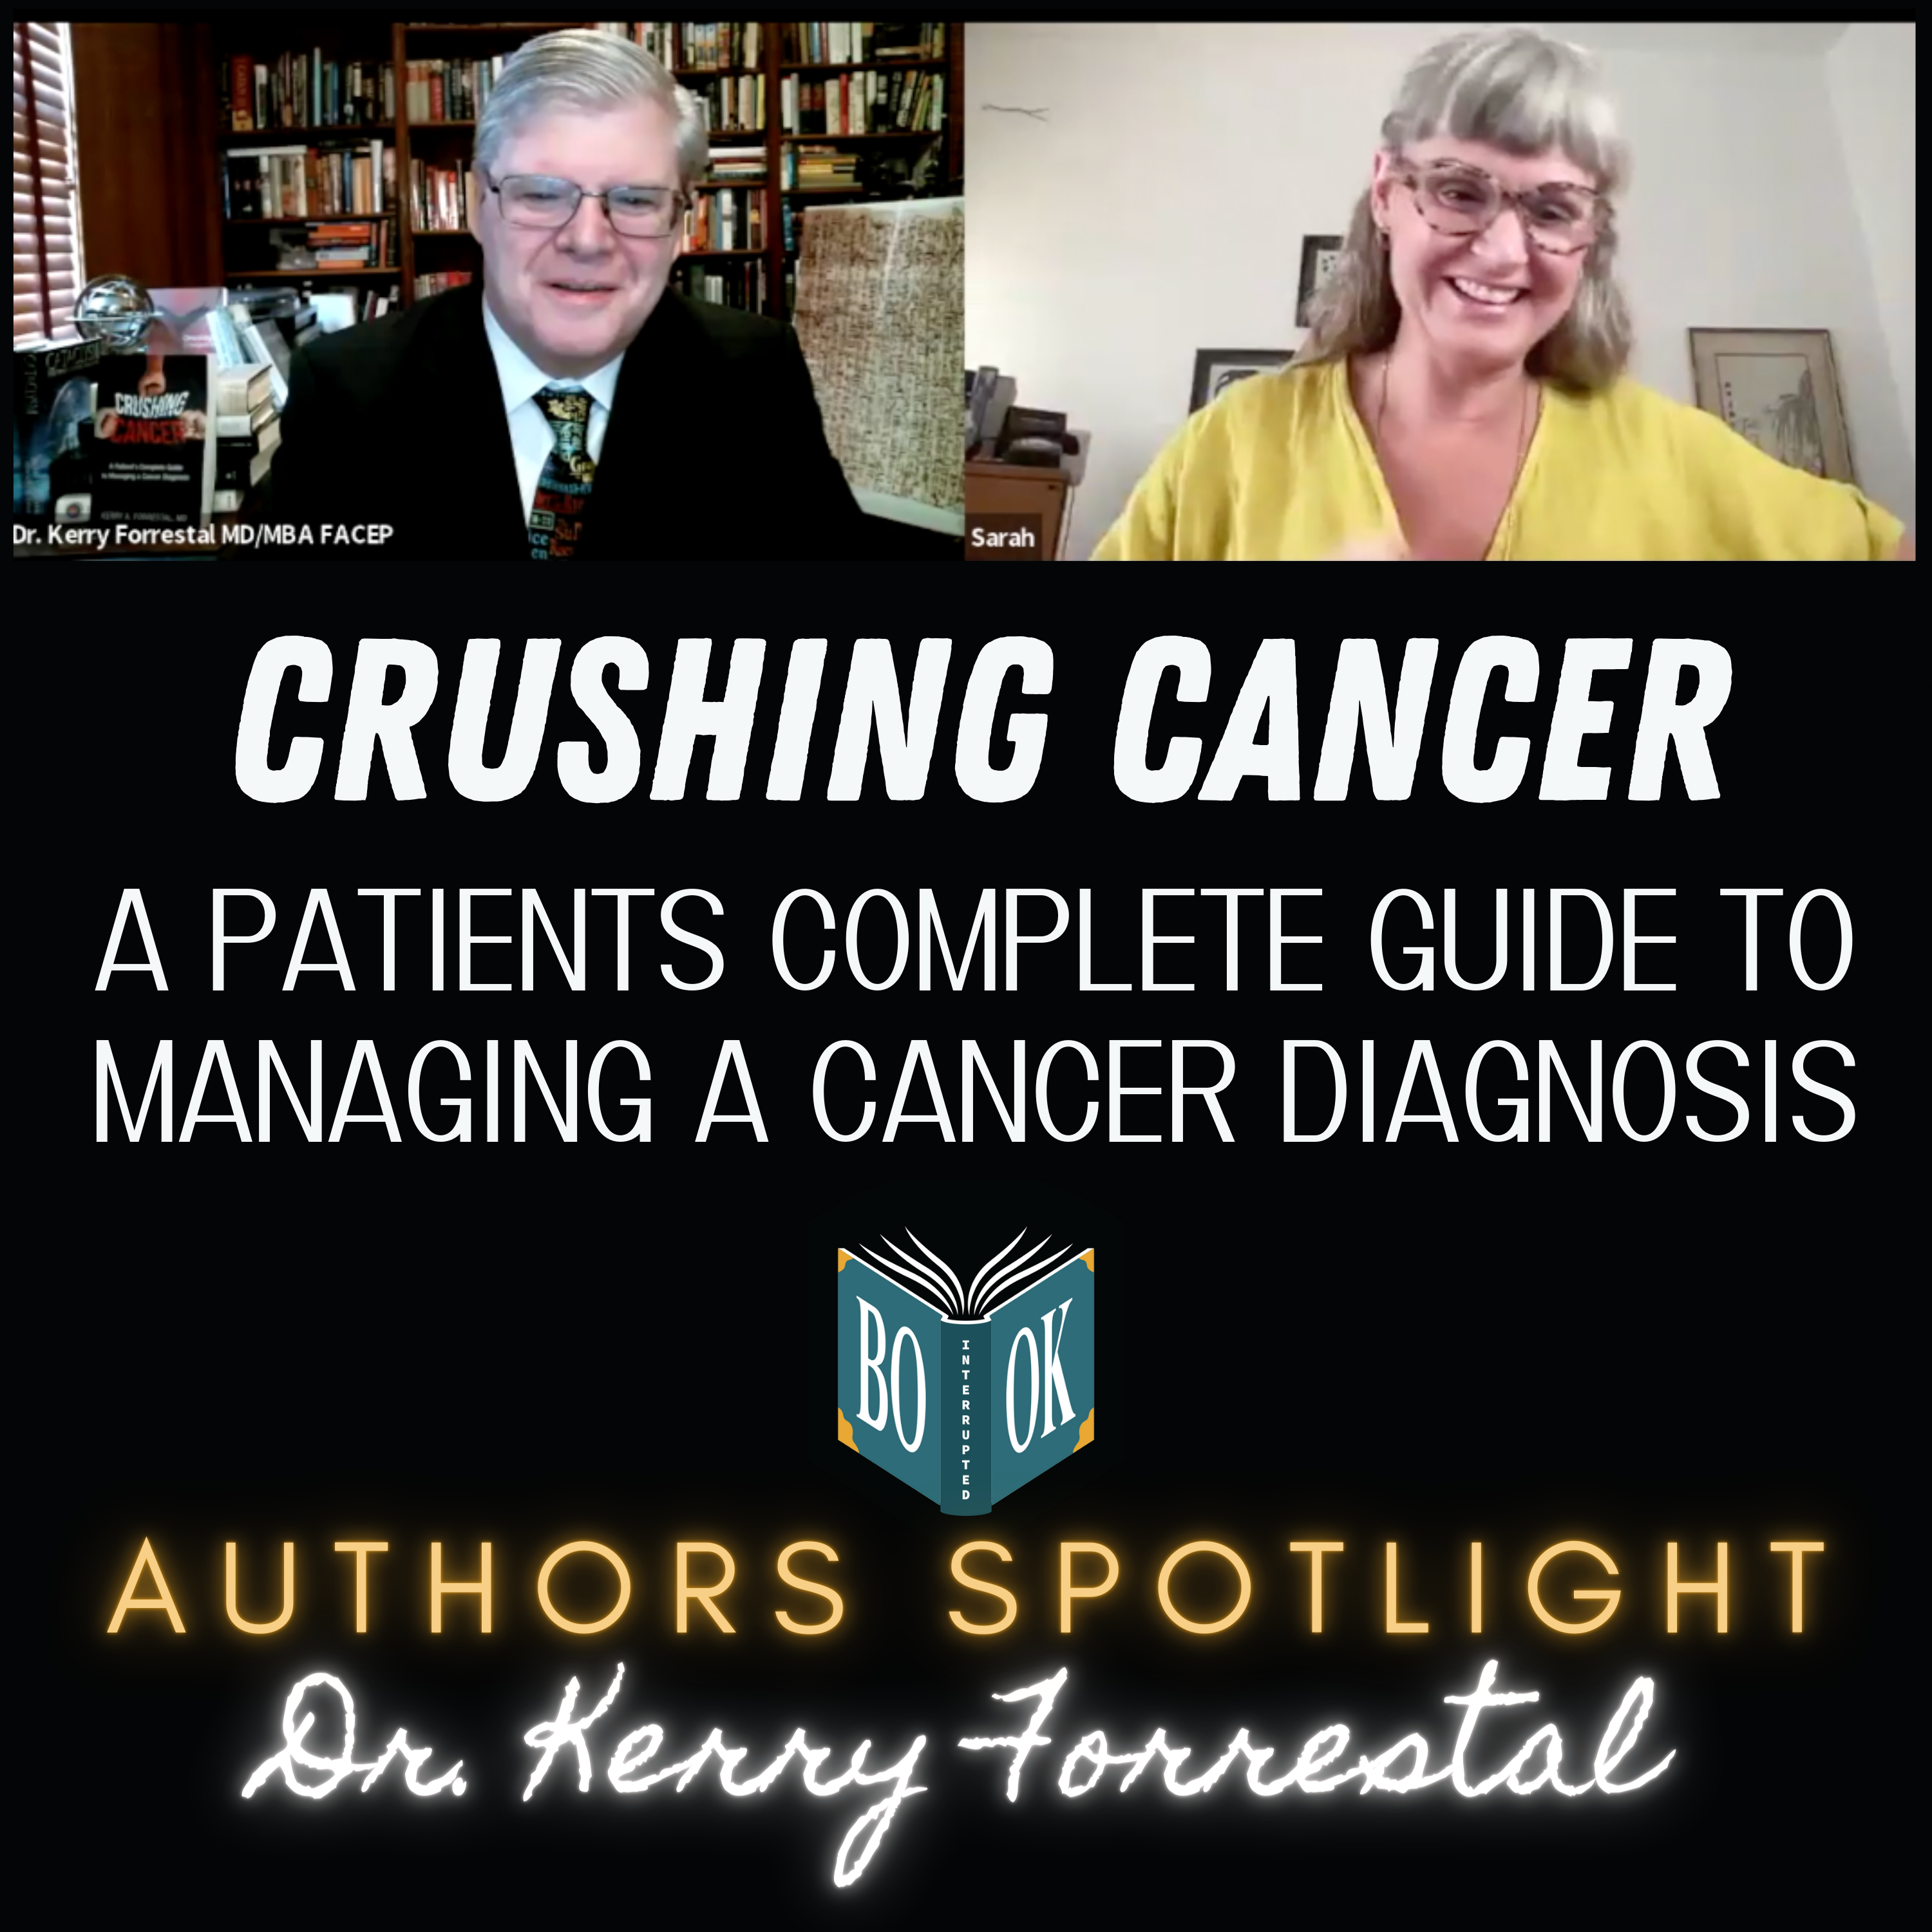 Authors Spotlight with Dr. Kerry Forrestal MD